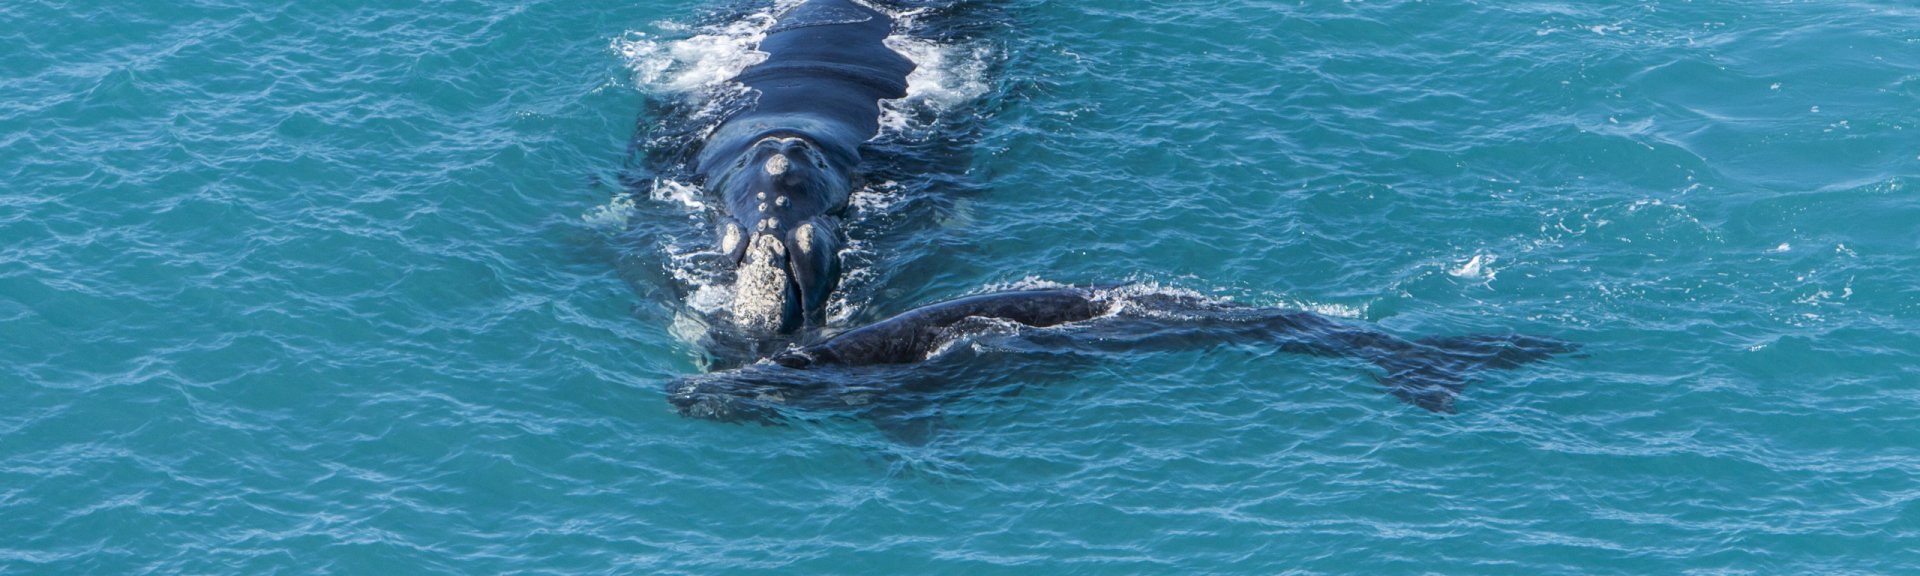 Southern right whale with calf